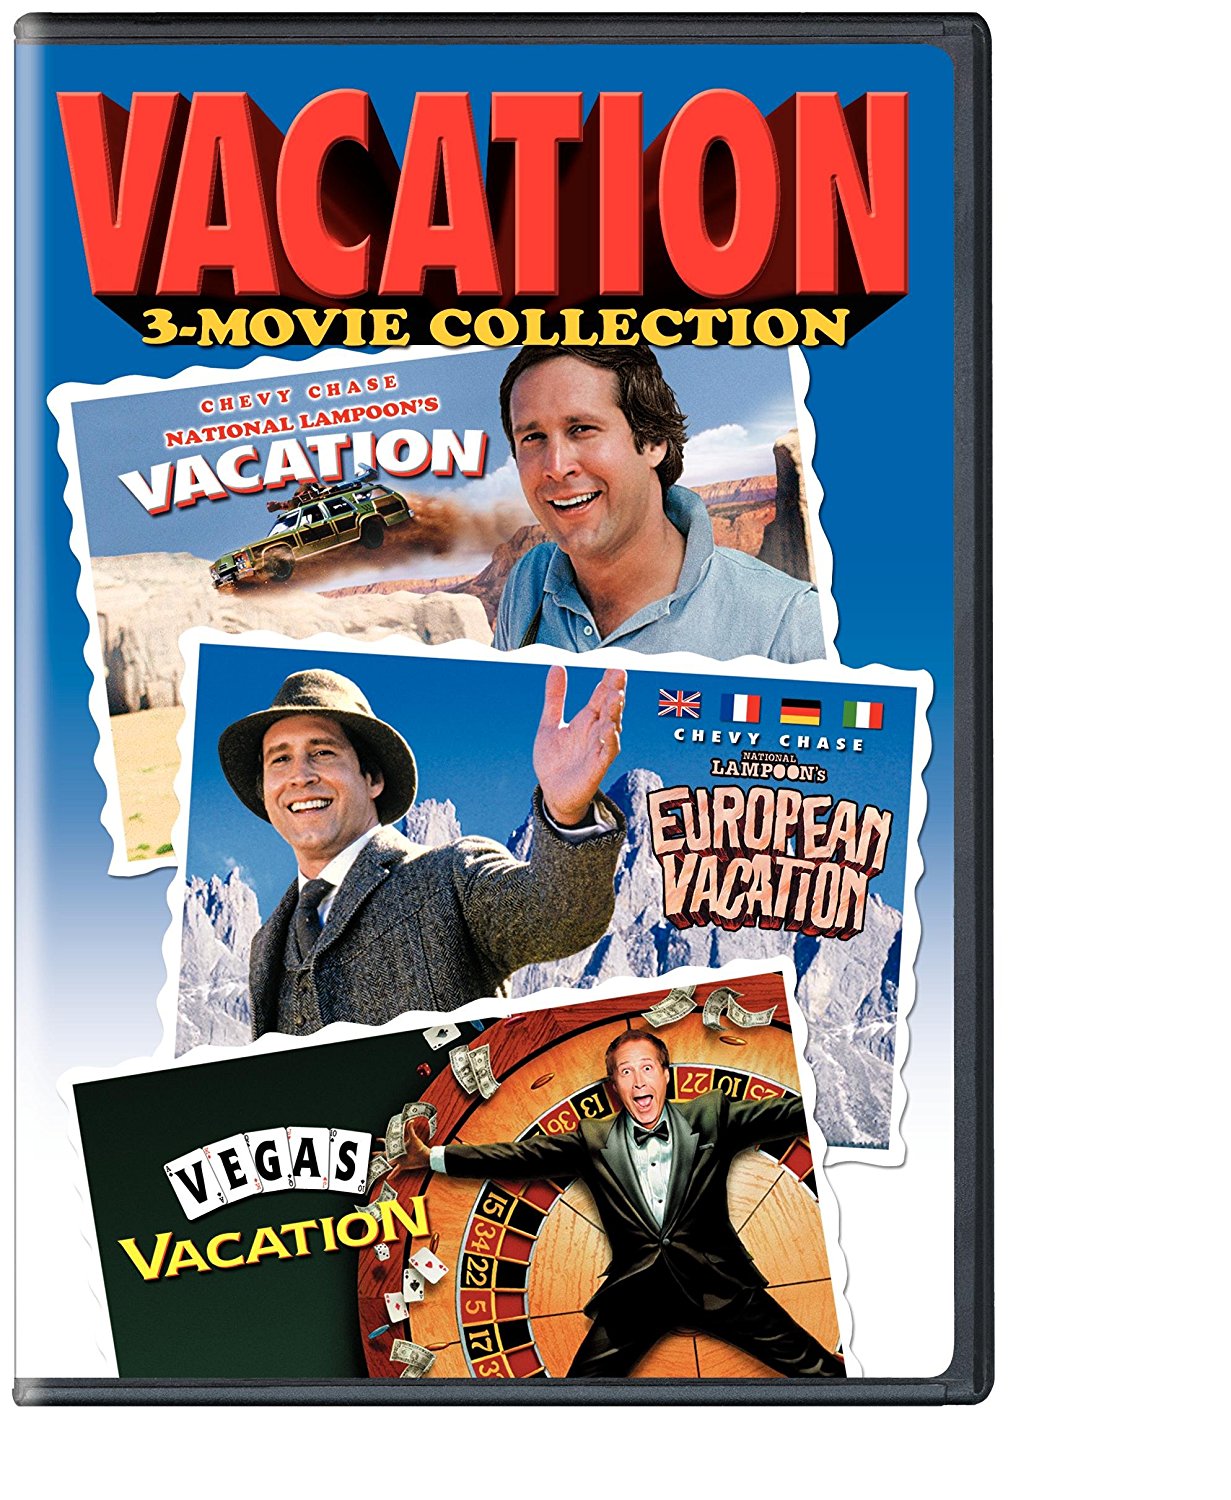 National Lampoon Vacation 3-Movie Collection (DVD) - image 5 of 5